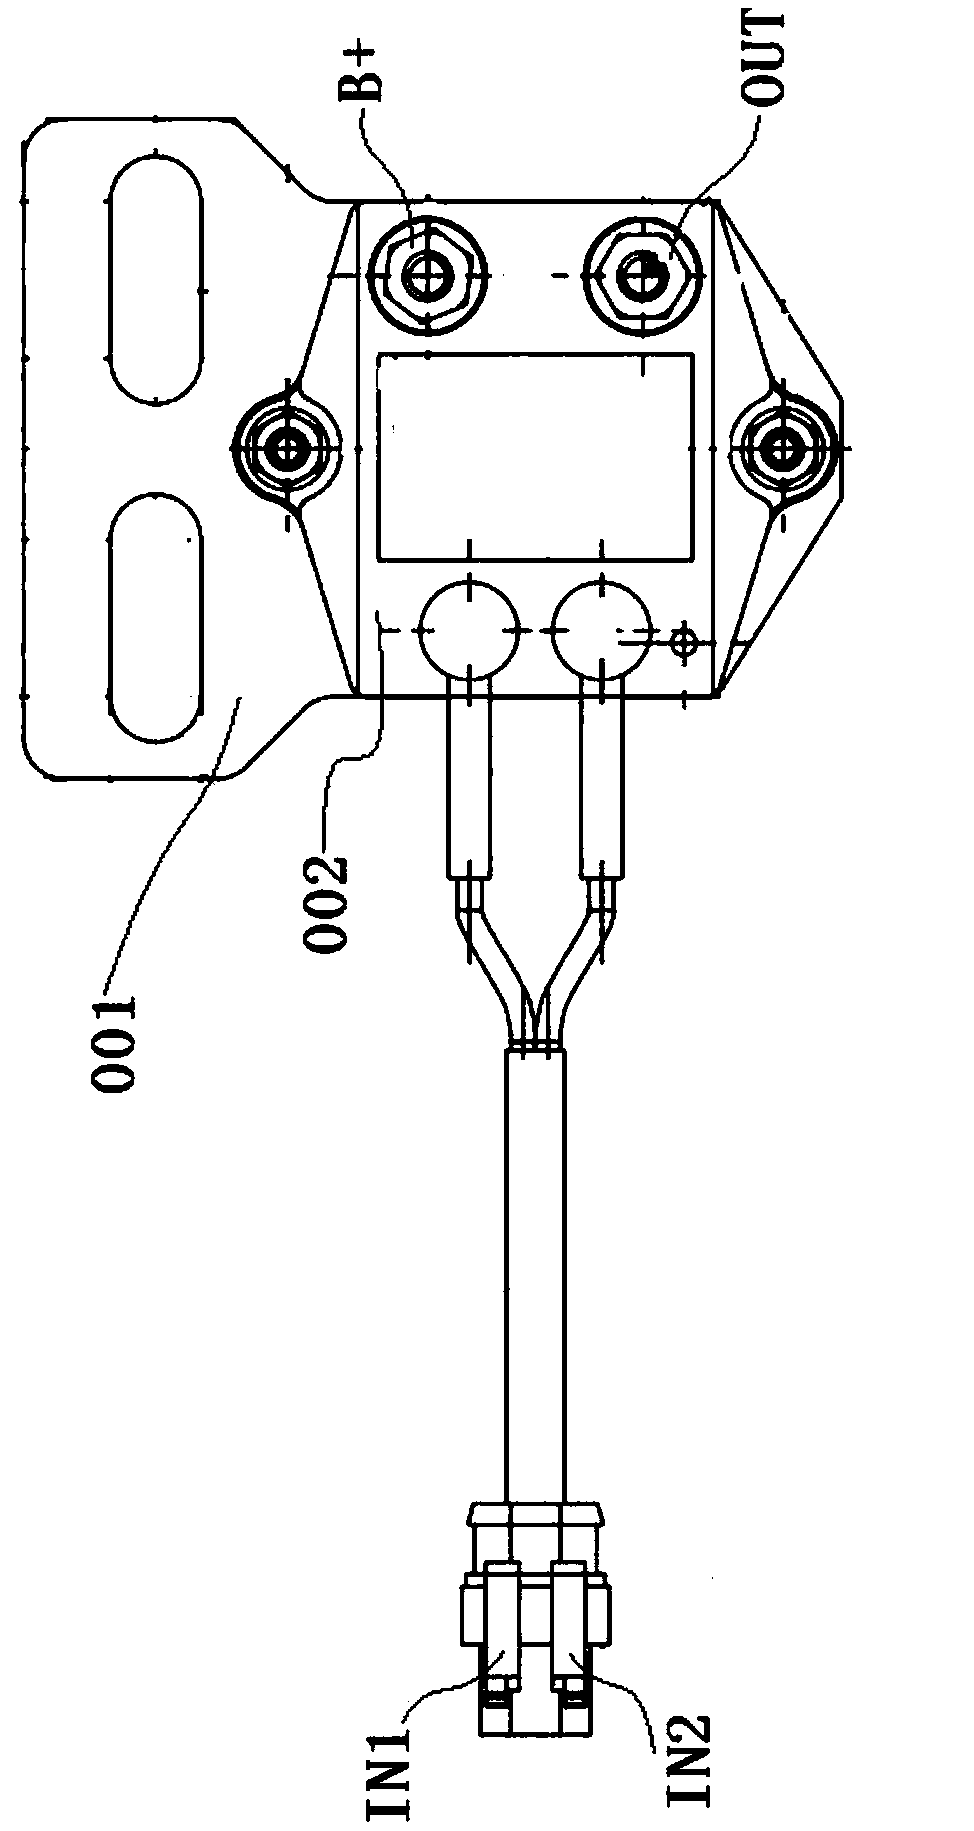 Electronic preheating relay of diesel engine